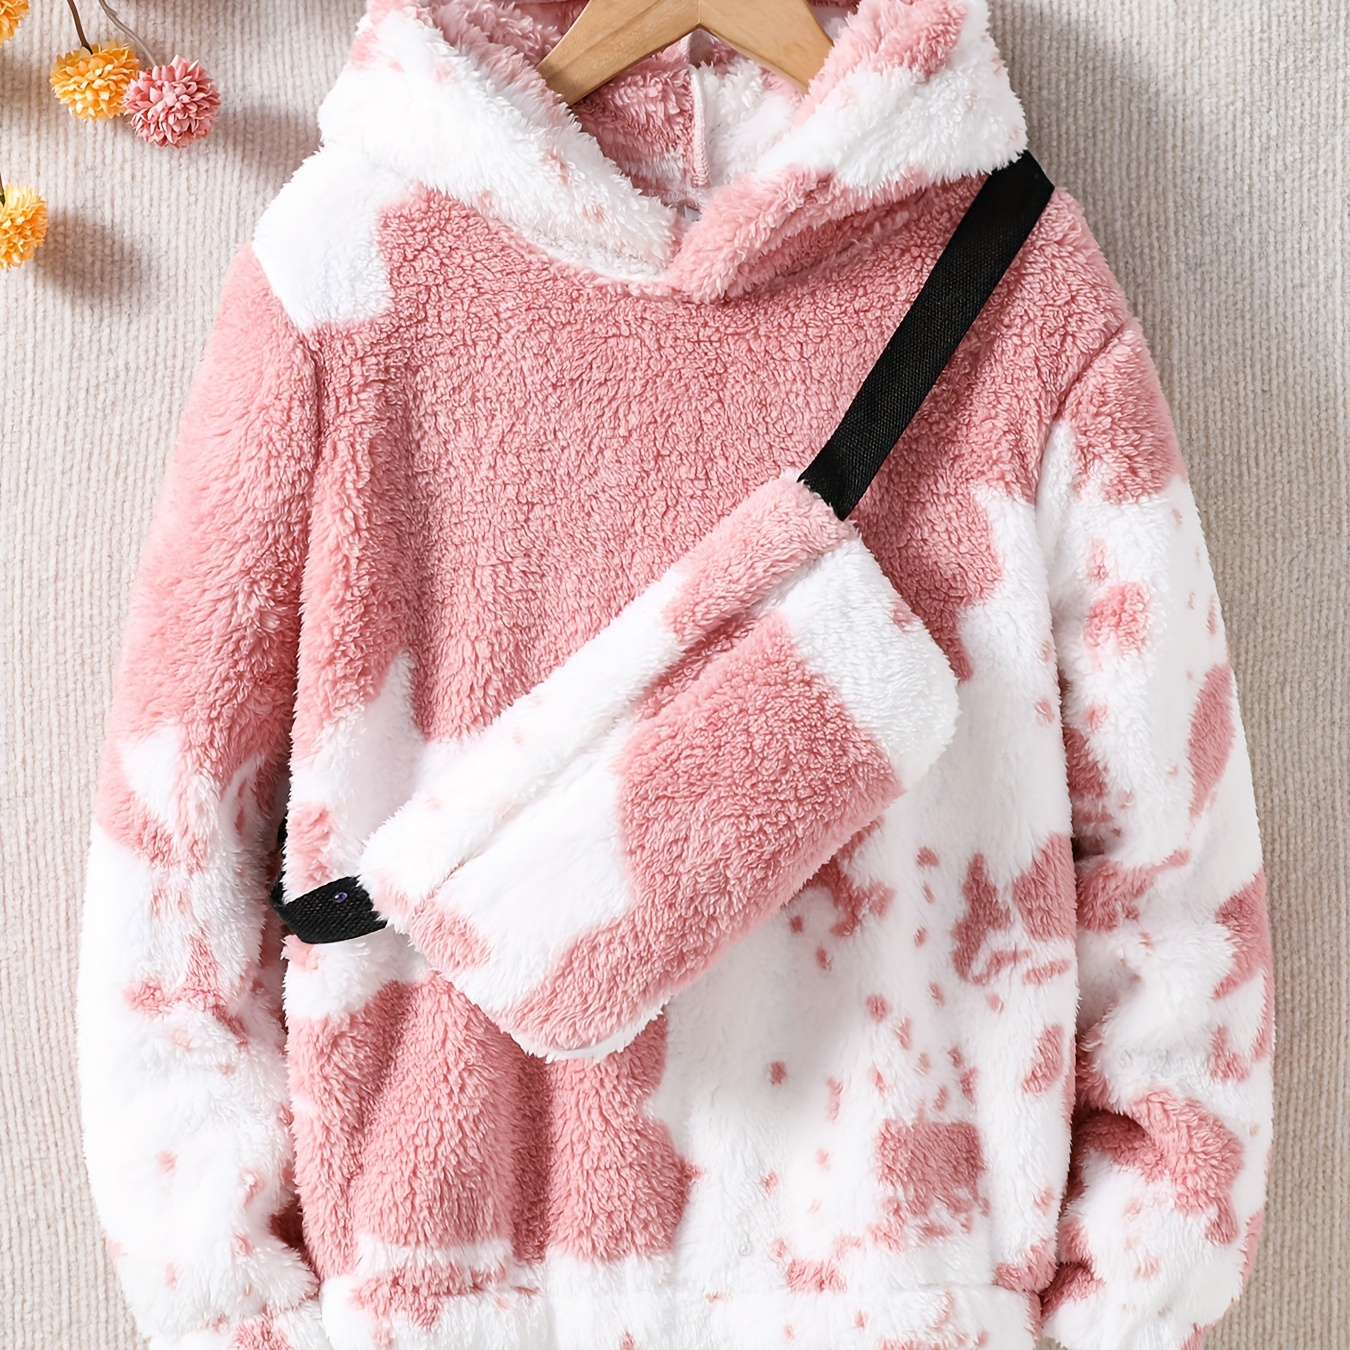 

2pcs Contrast Fuzzy Tops And Bag Set For Girls, Casual Warm Teddy Sweatshirt Tops For Kids Fall Winter Outfit, Gifts